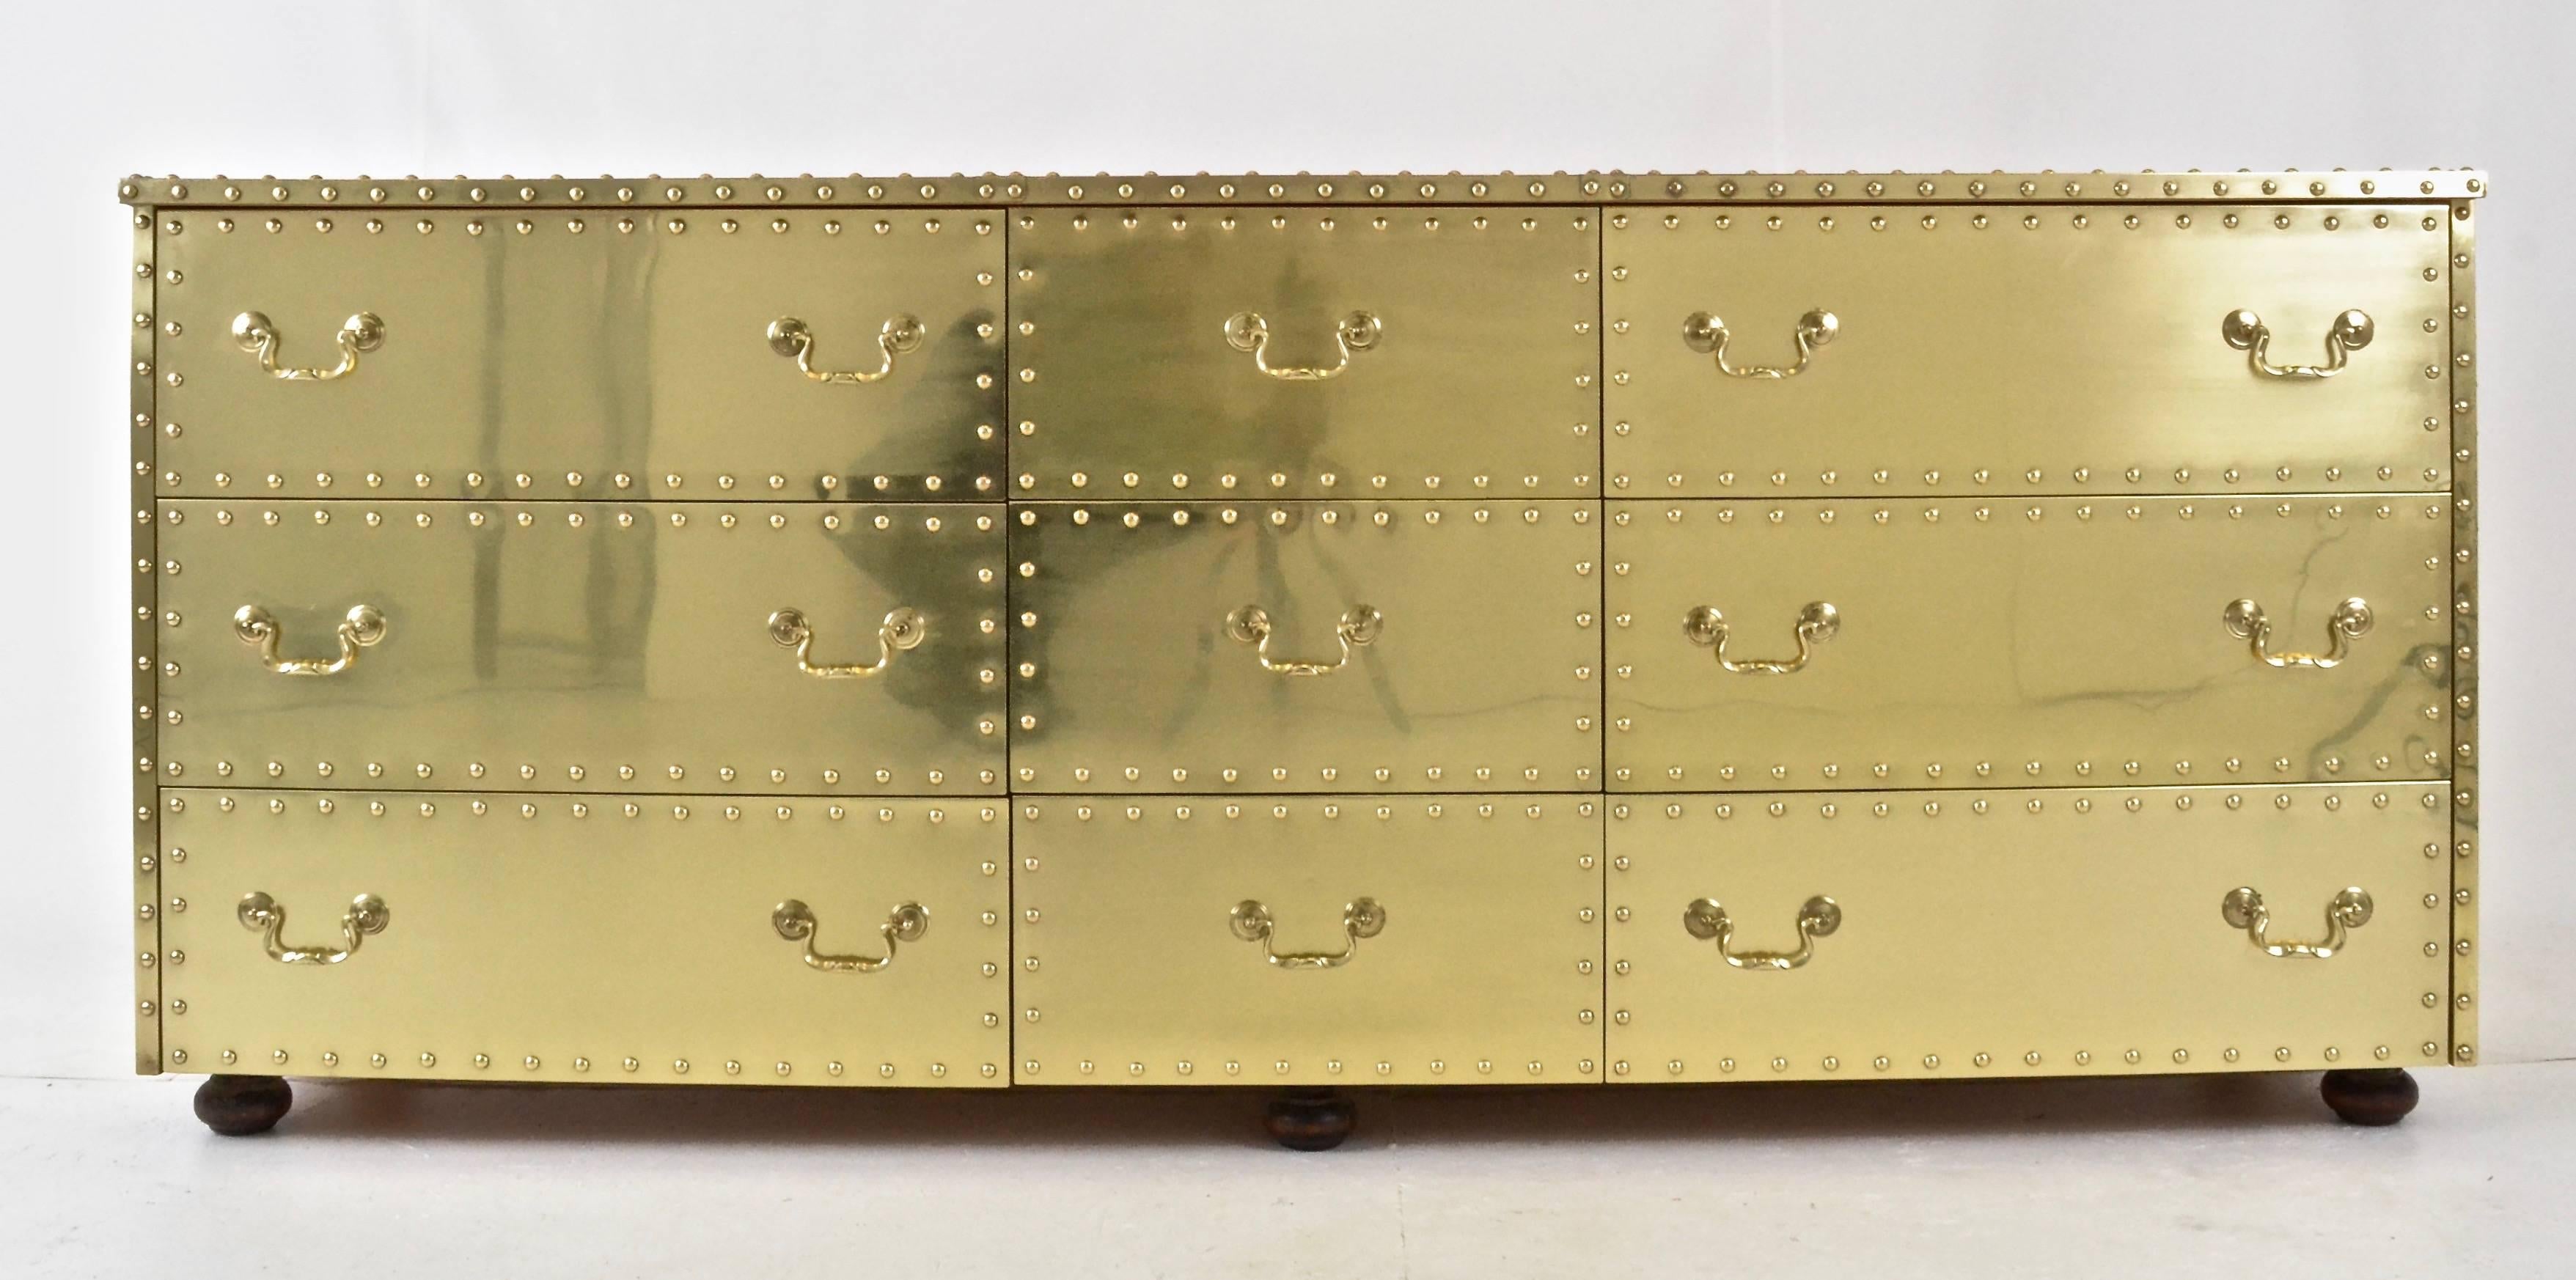 A nice clean example of the Sarreid brass-clad dresser with non drawers. Clad on three sides with solid brass sheeting and nail-head decoration. Very glam!